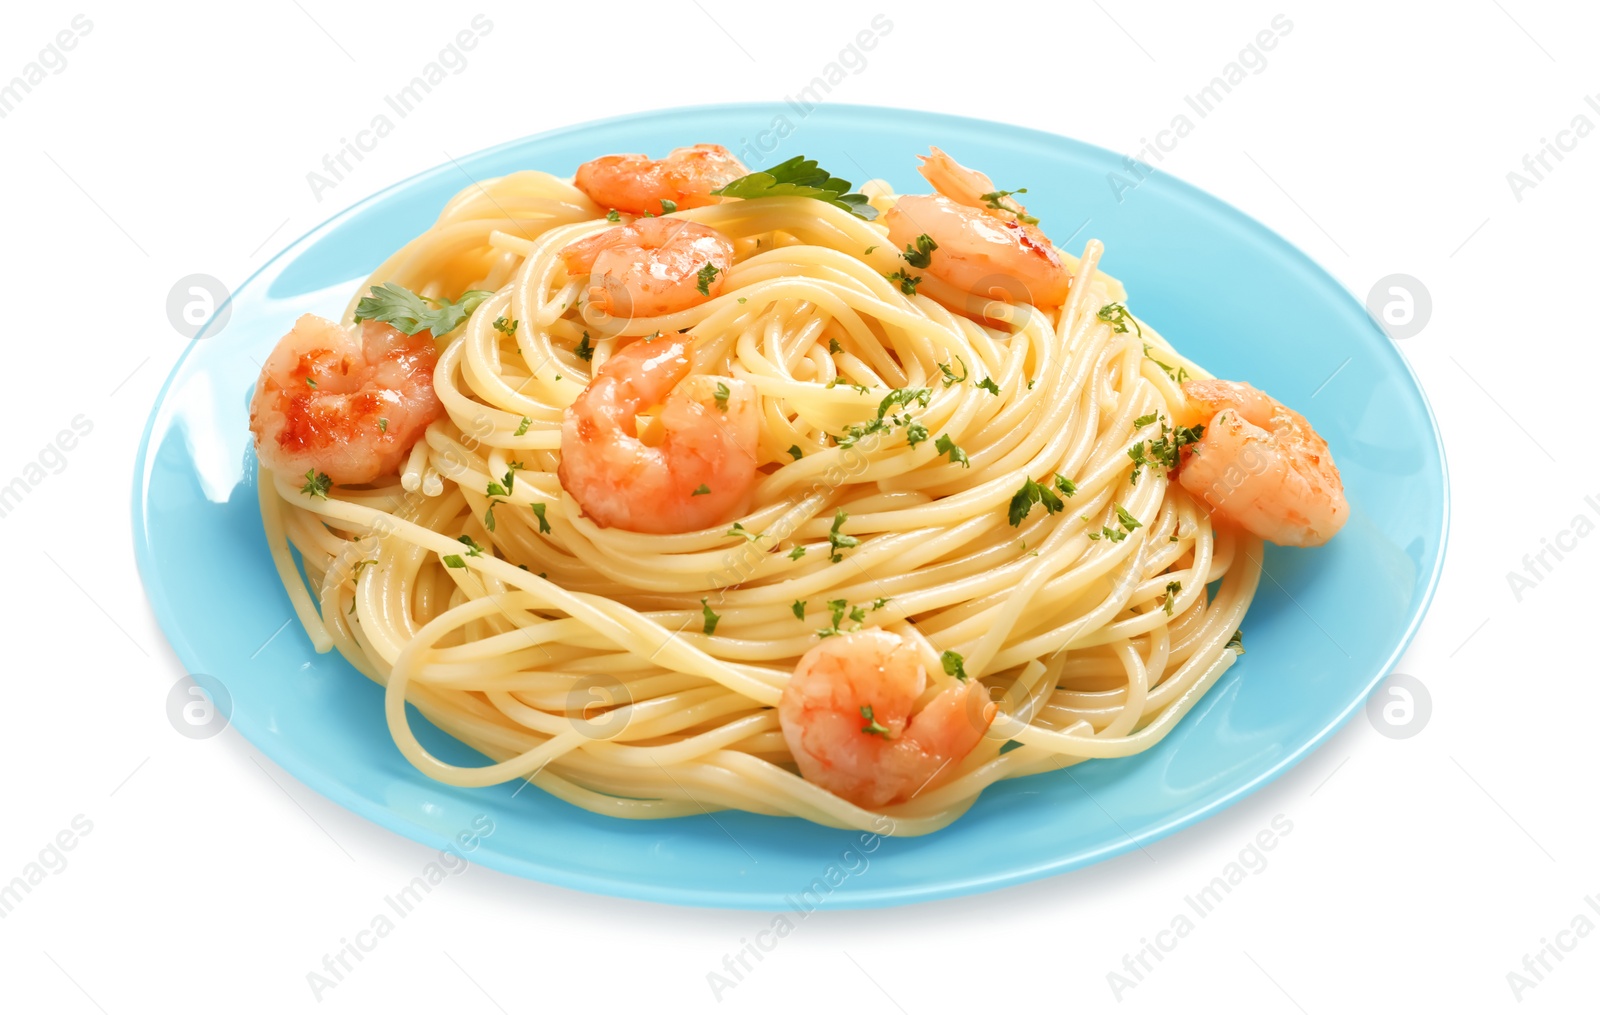 Photo of Plate with spaghetti and shrimps on white background